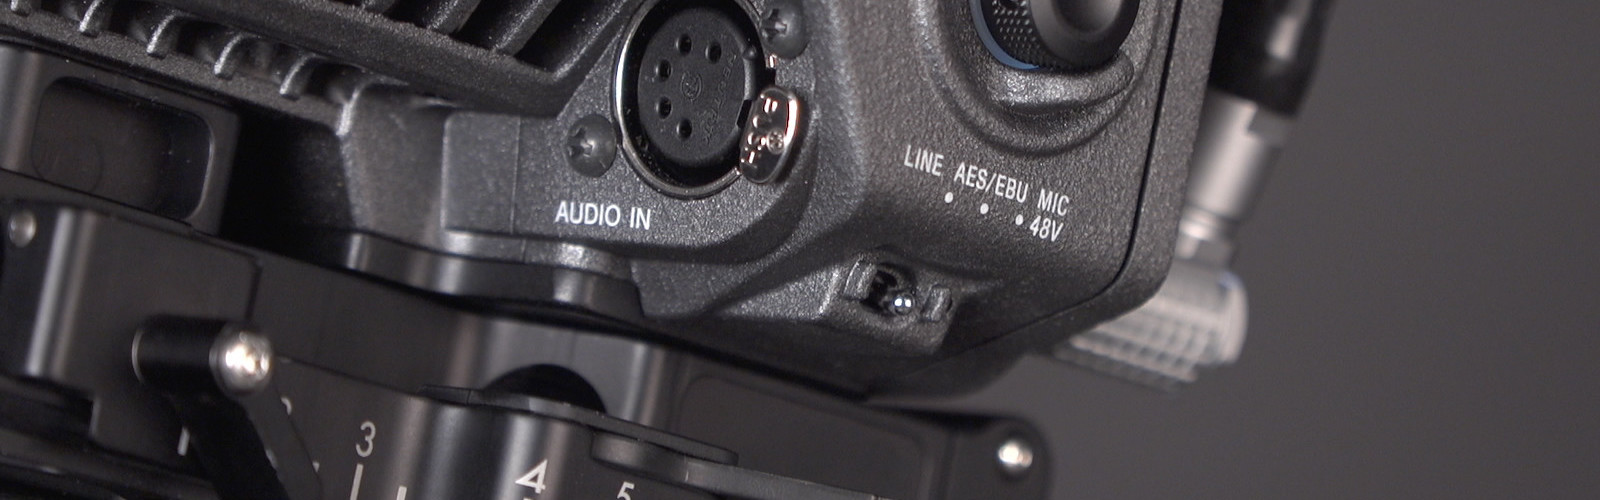 Header image for article At the Bench: Audio and the Sony VENICE Camera